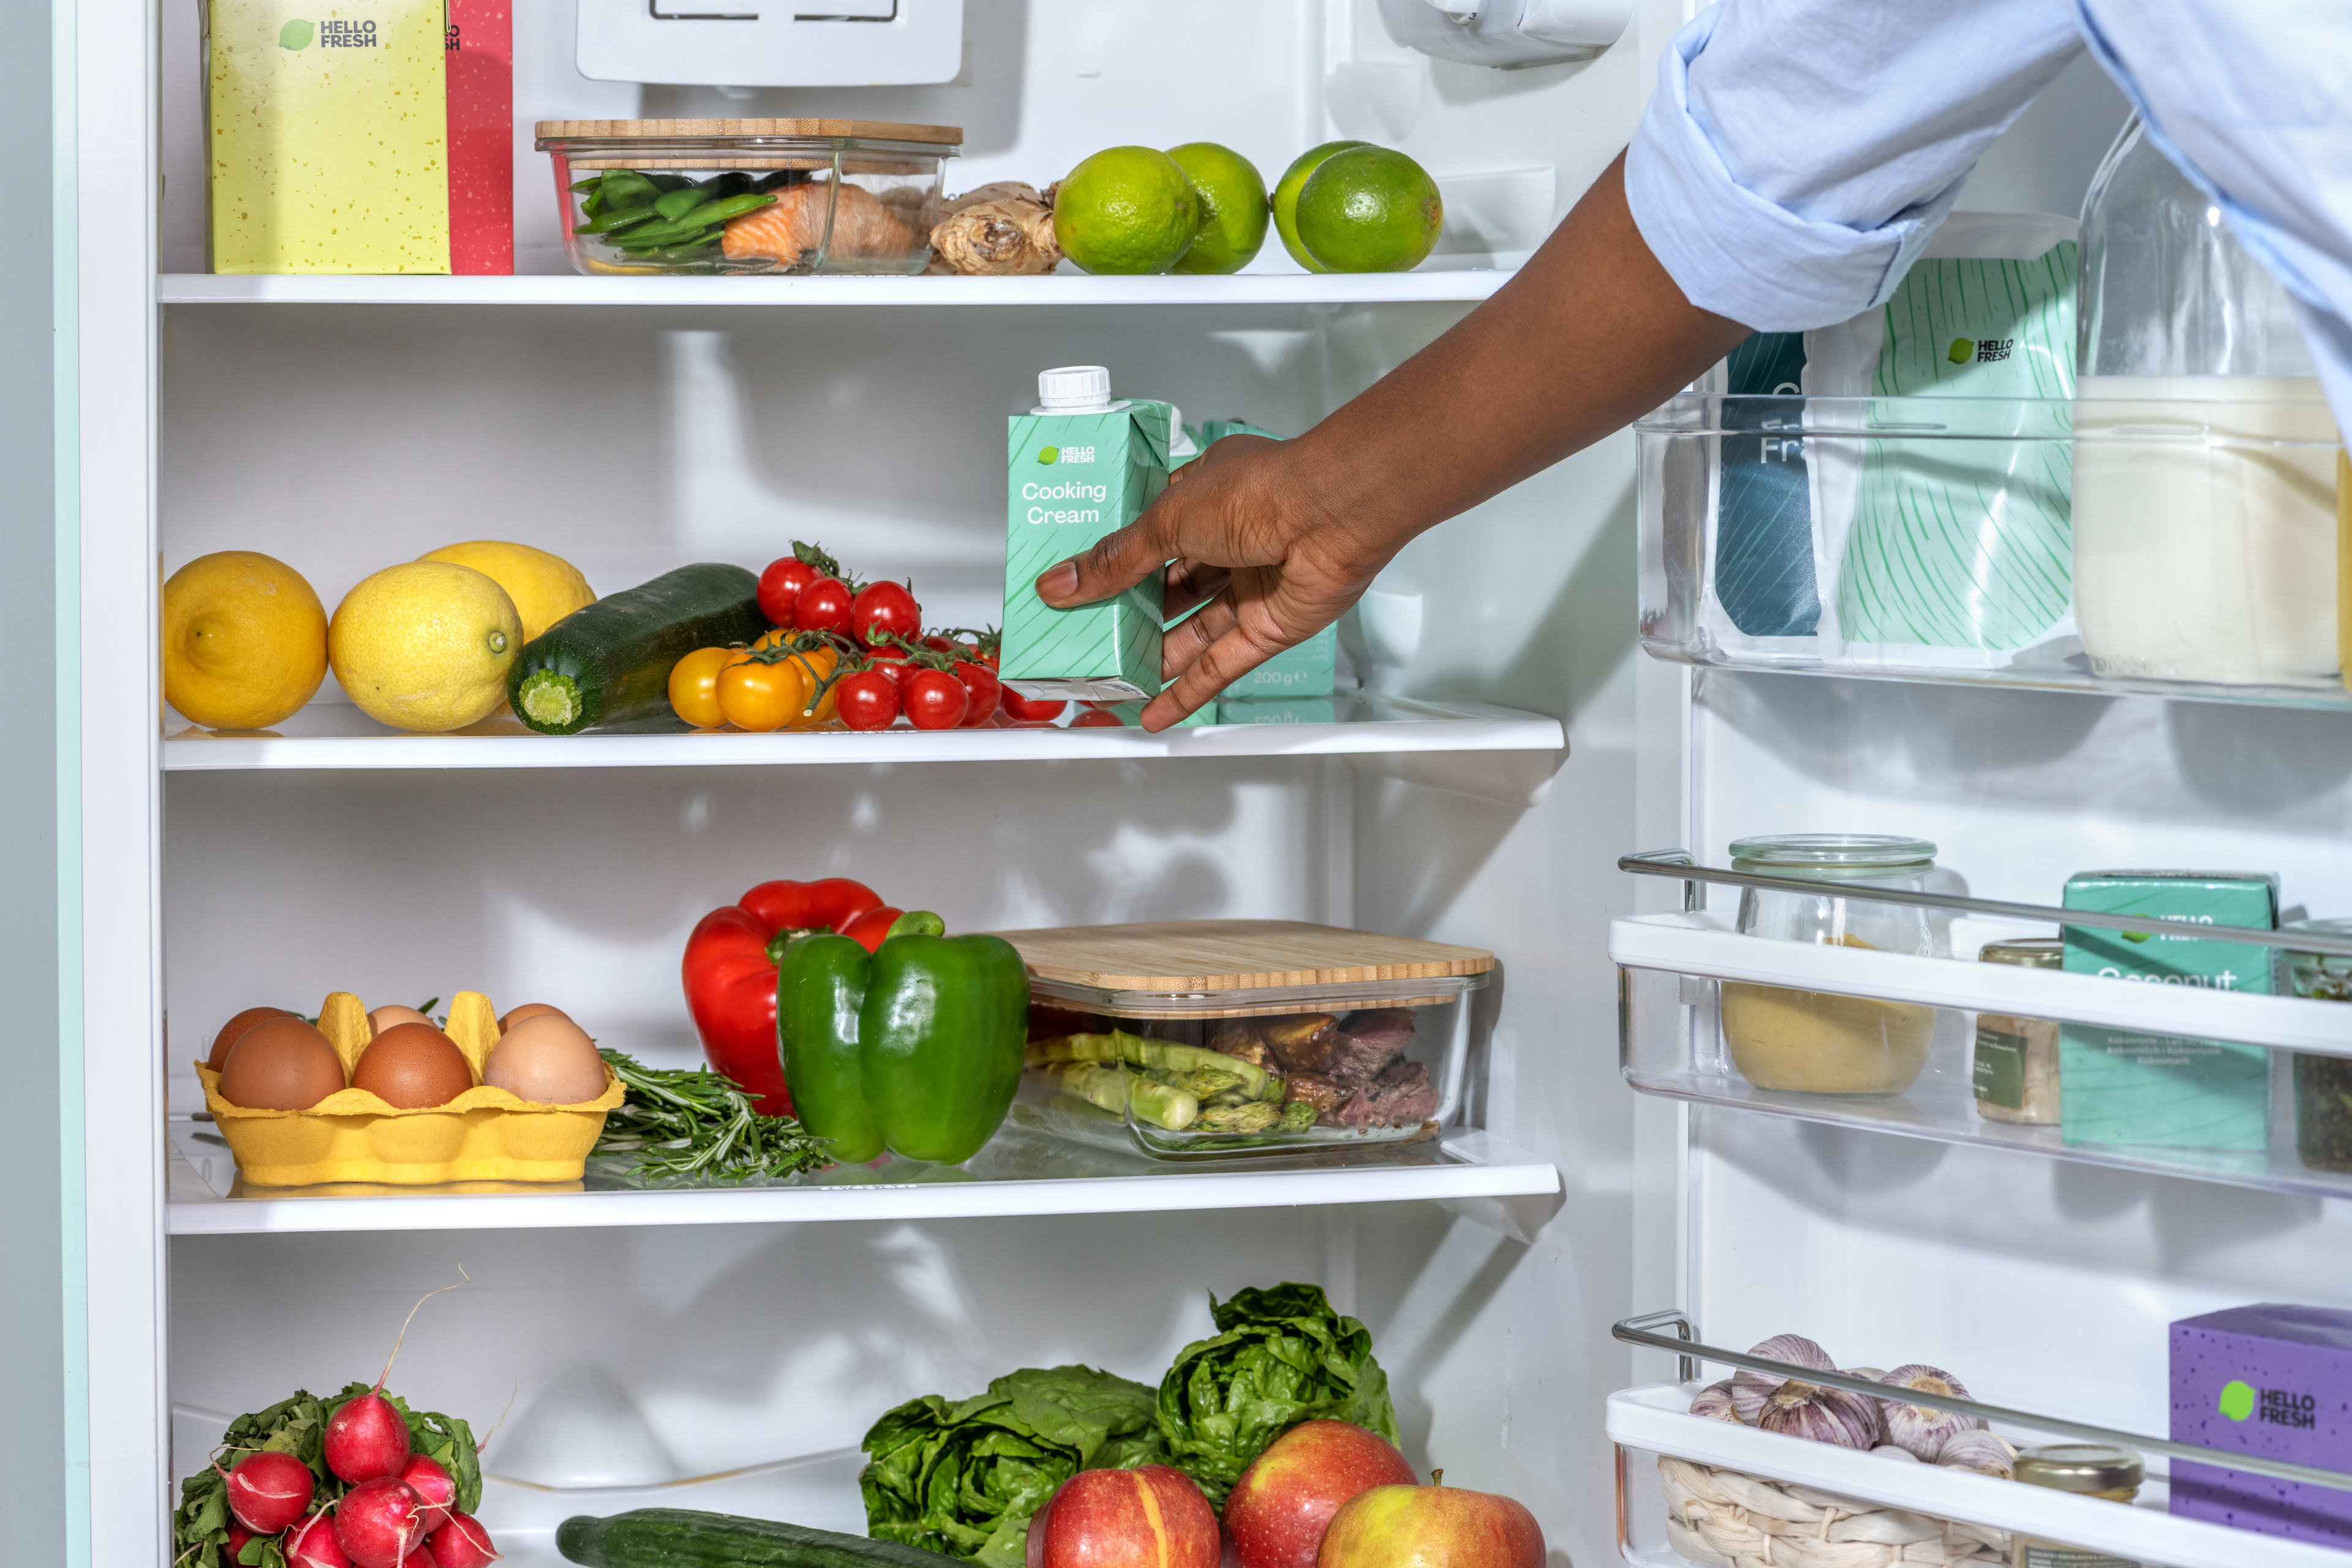 What’s the best way to store food so it lasts longer?